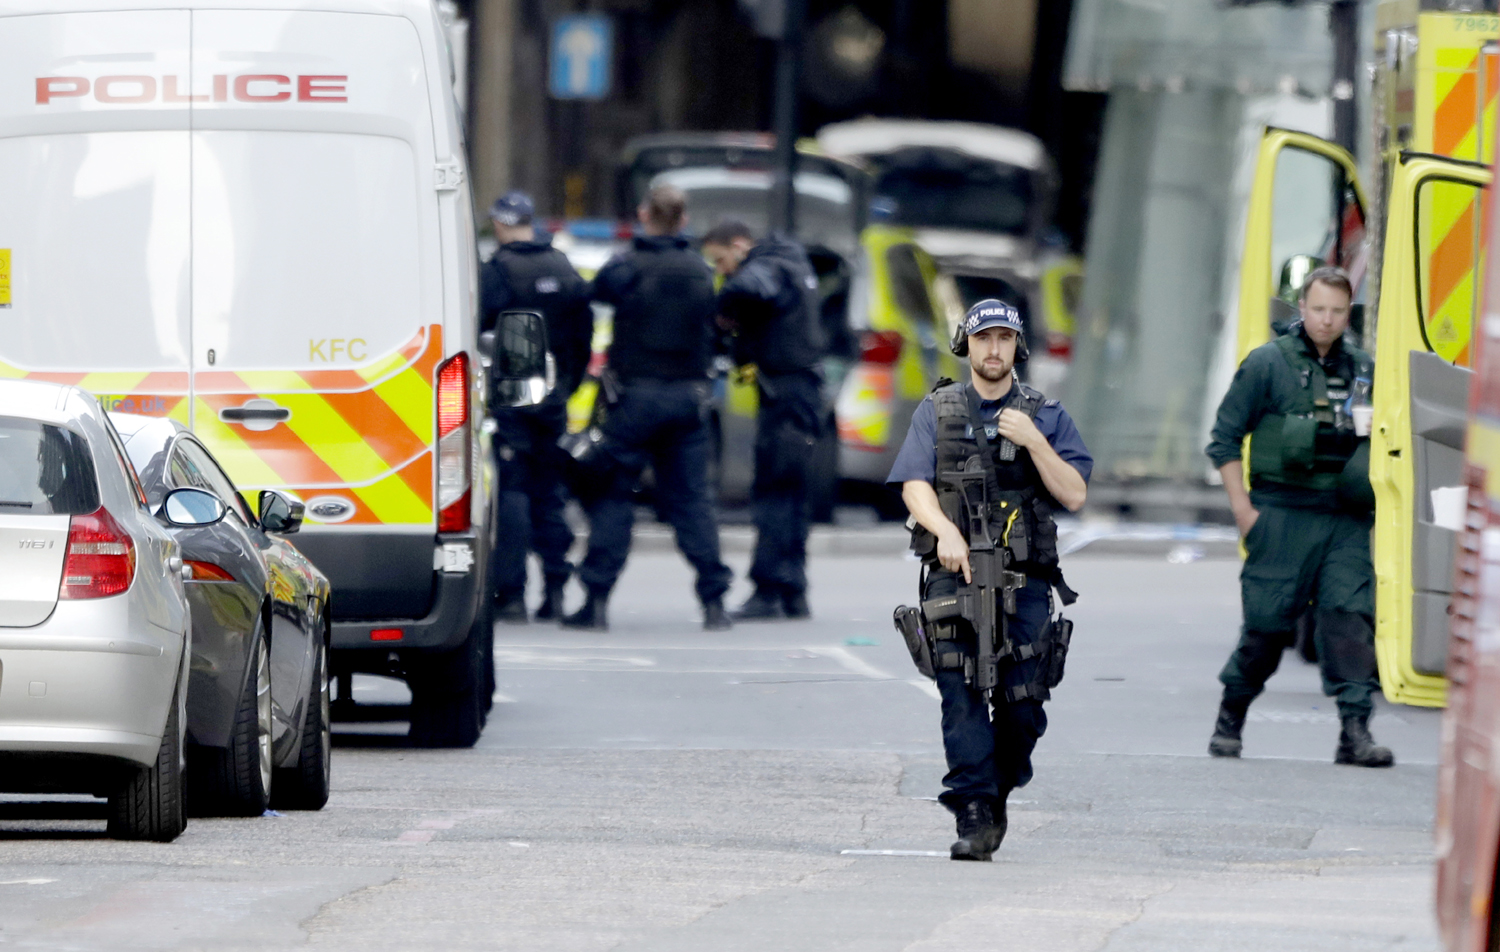 An armed British police officer walks within a cordoned off area after an attack in the London Bridge area of London, June 4, 2017. Terrorism struck at the heart of London, police said Sunday, after a vehicle veered off the road and mowed down pedestrians on London Bridge and witnesses told of men with large knives stabbing passersby at nearby Borough Market. [Photo: AP/Matt Dunham]